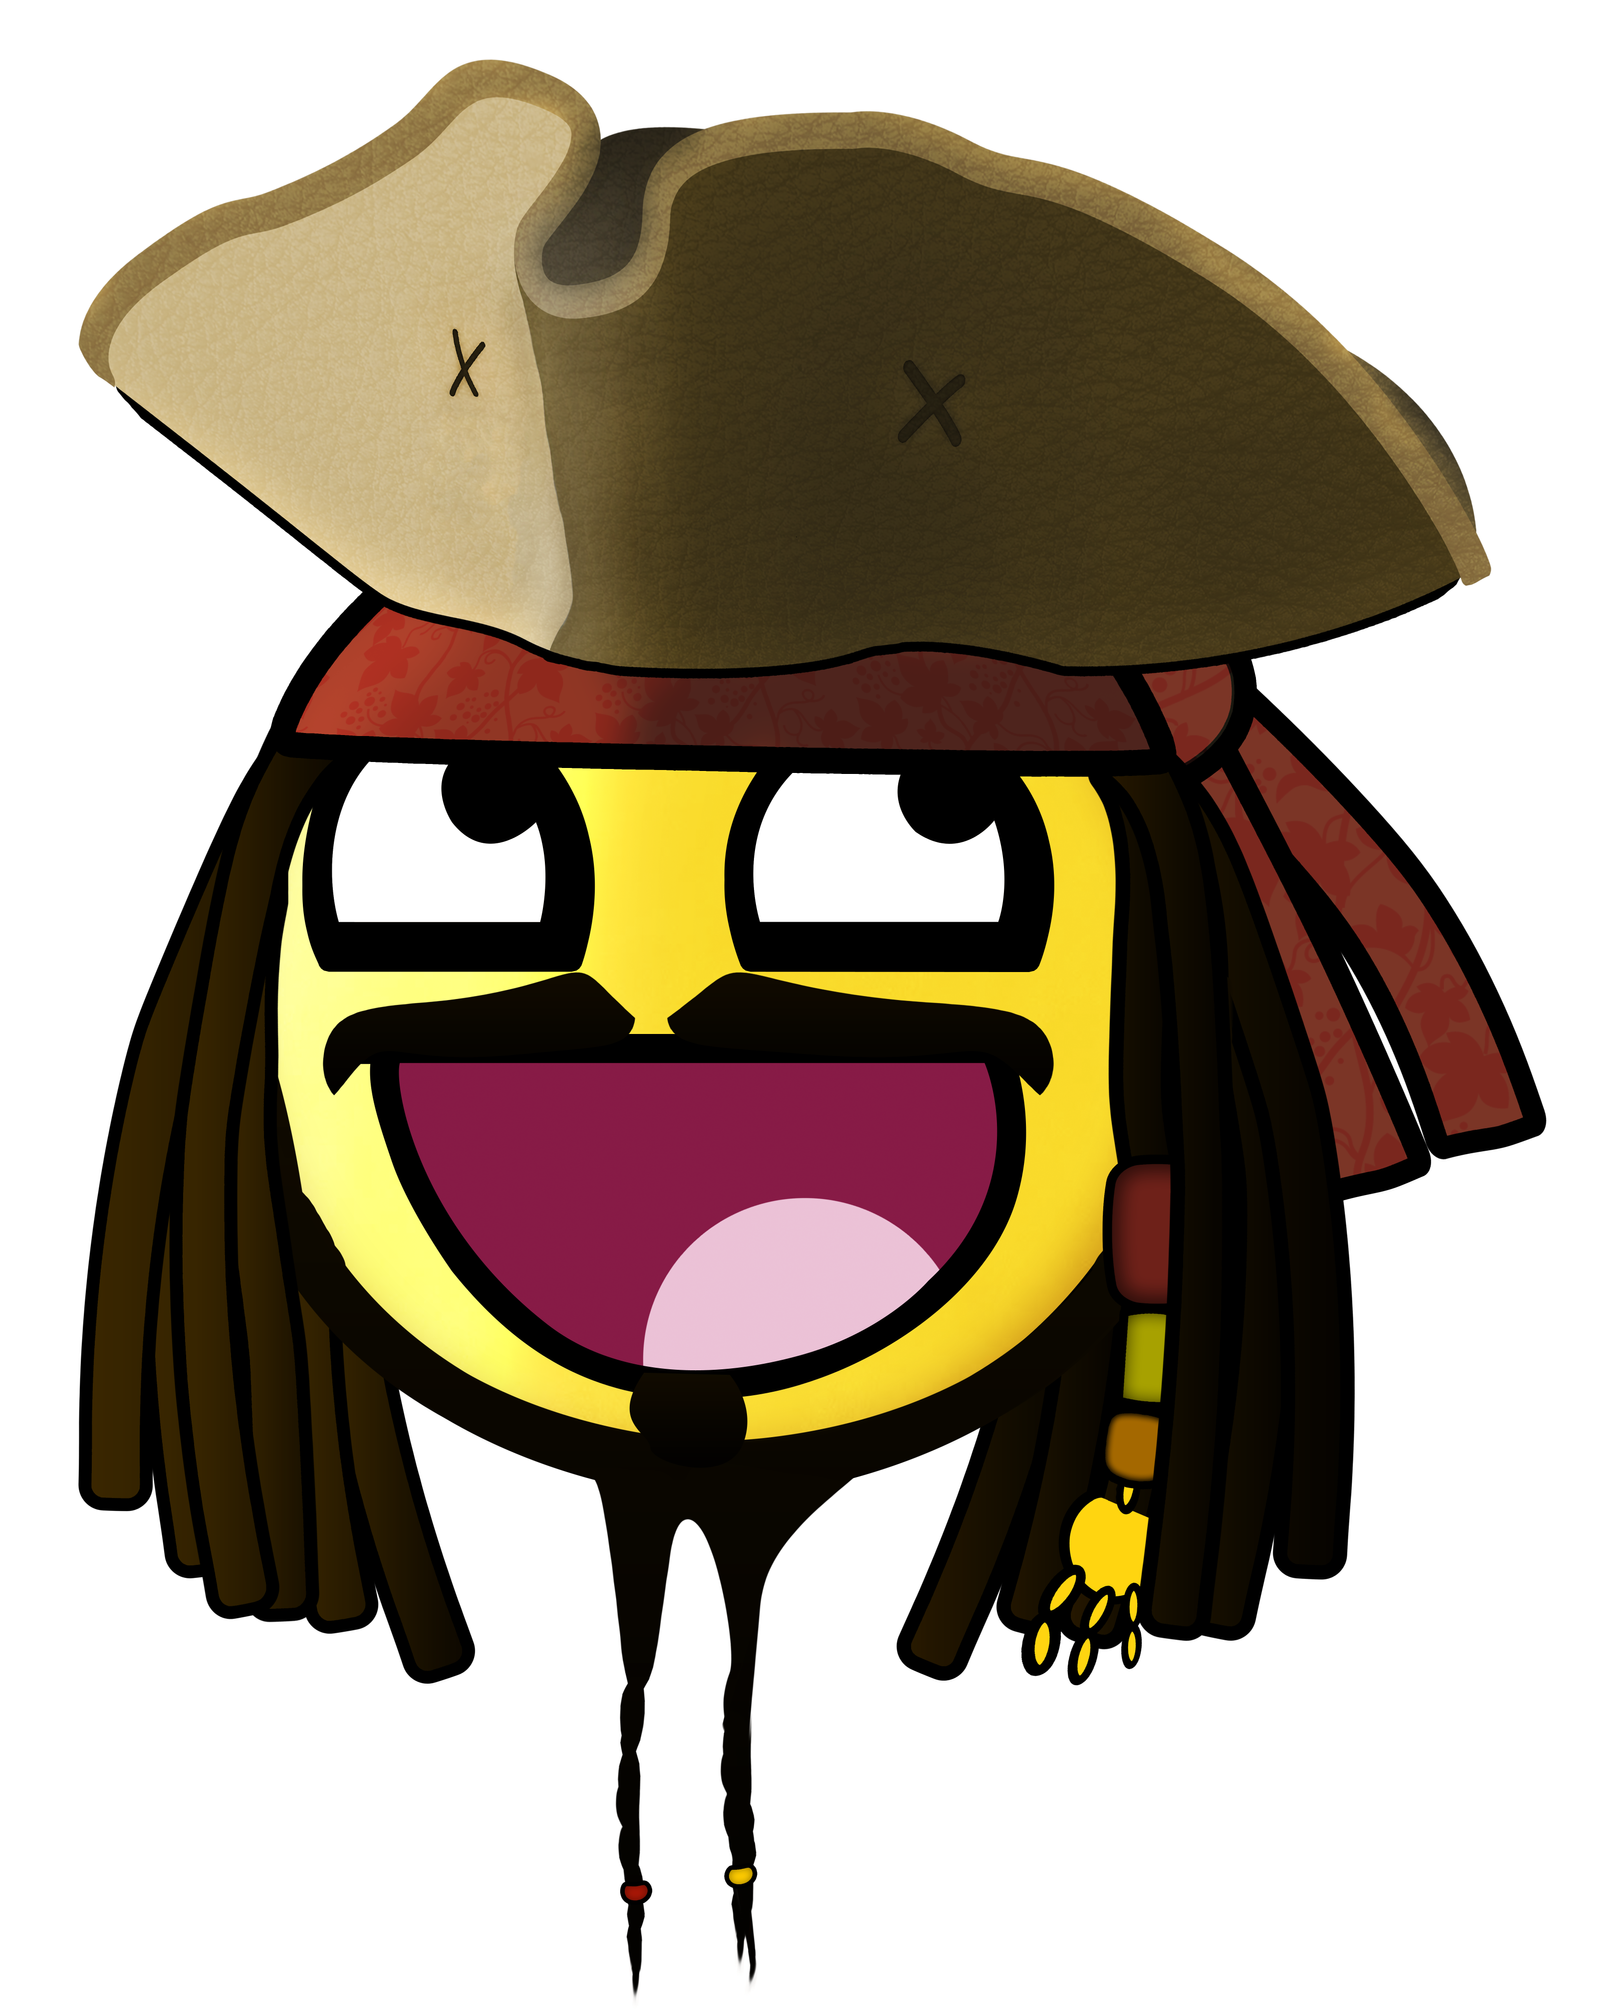 Jack_Sparrow_Awesome_Smiley_by_E_rap.png